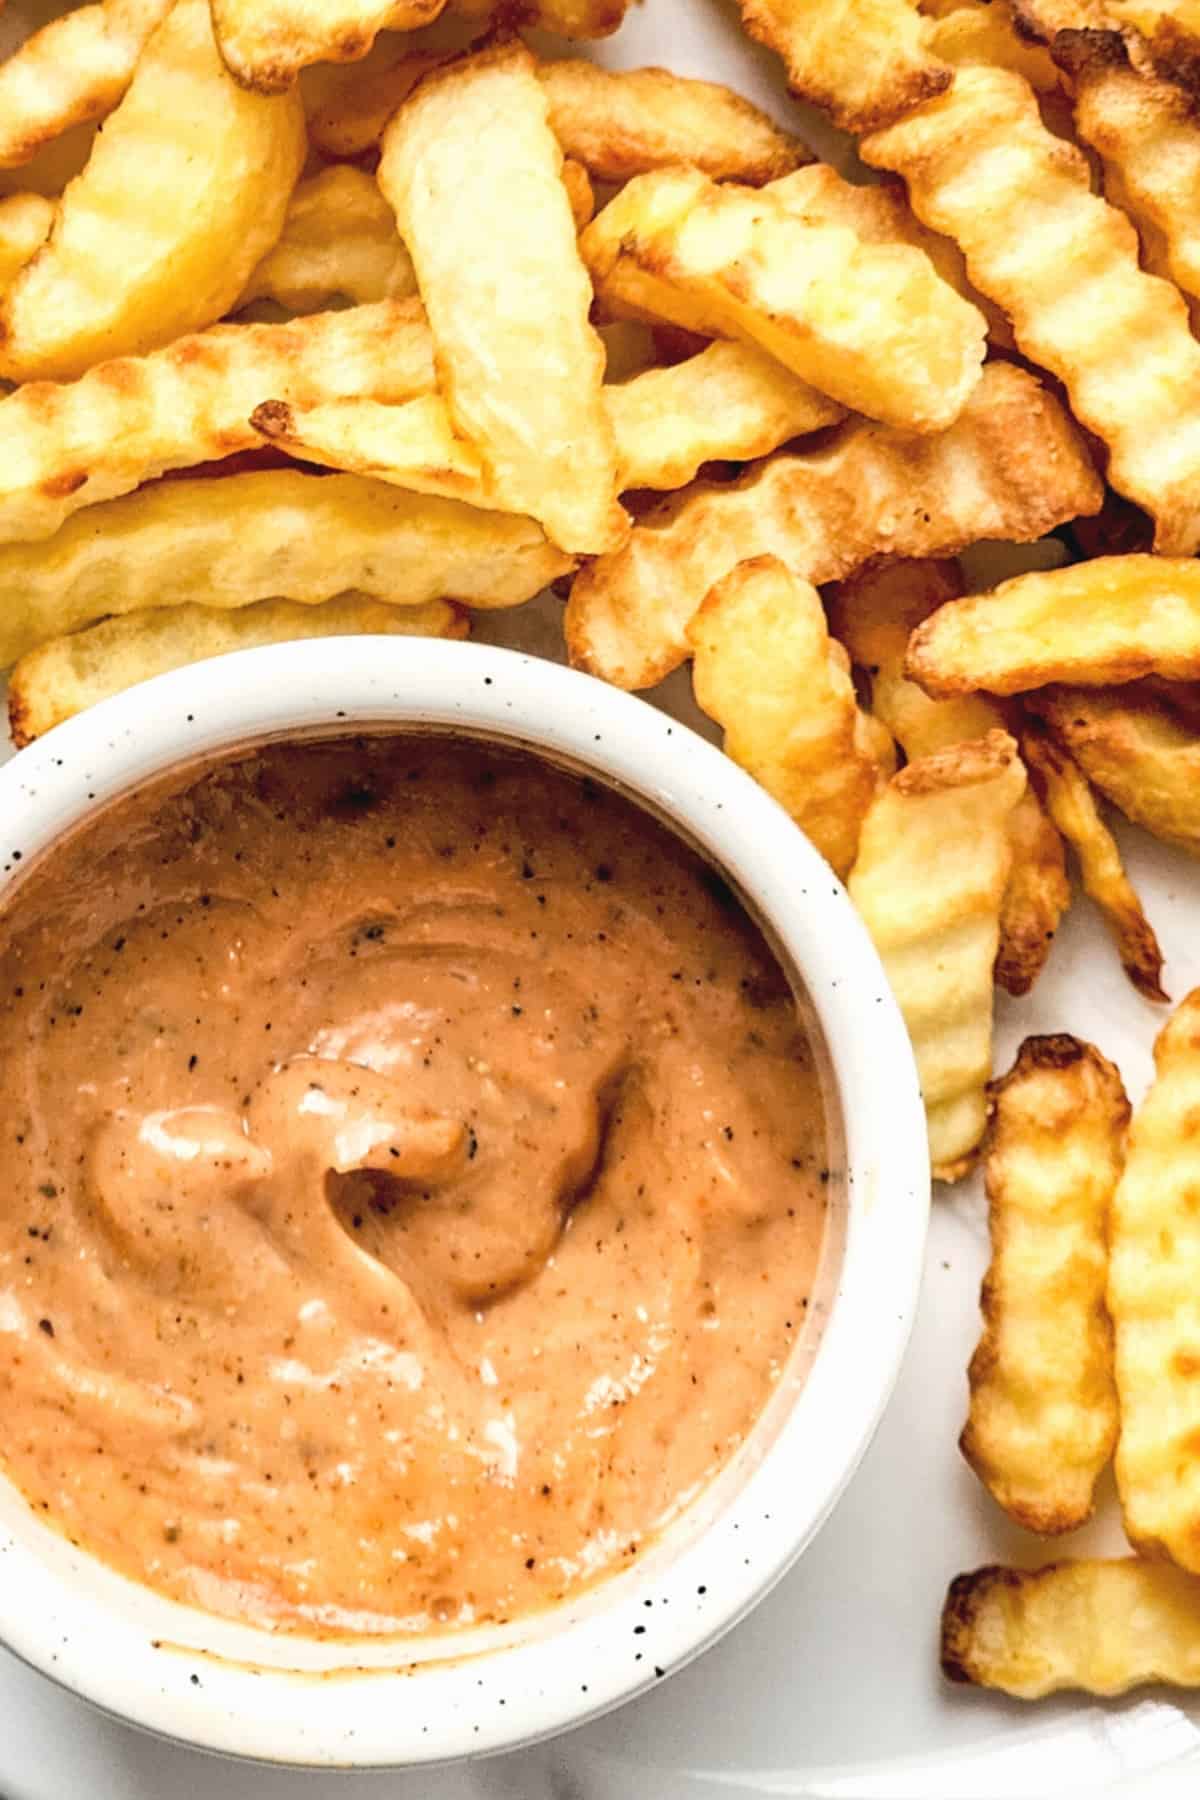 Top down view of a bowl of copycat Raising Cane's sauce surrounded by fries.